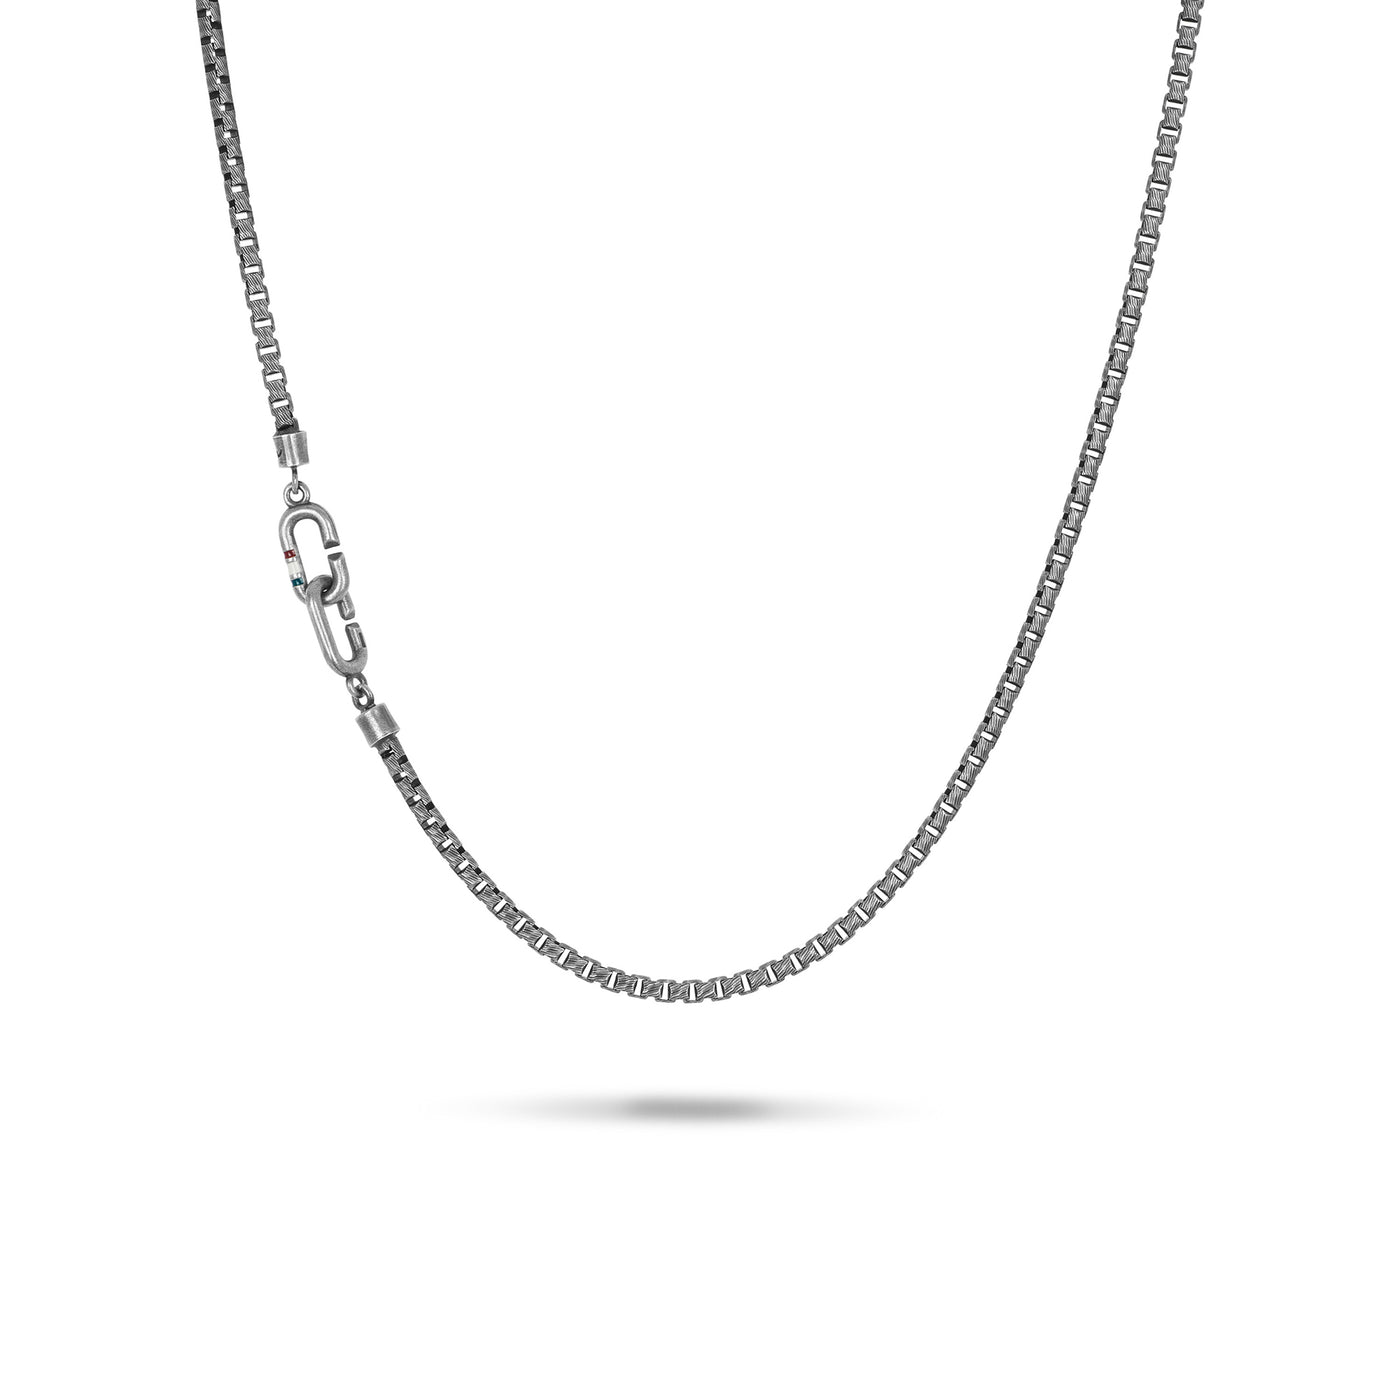 THE LINK Oxidized Silver Chain